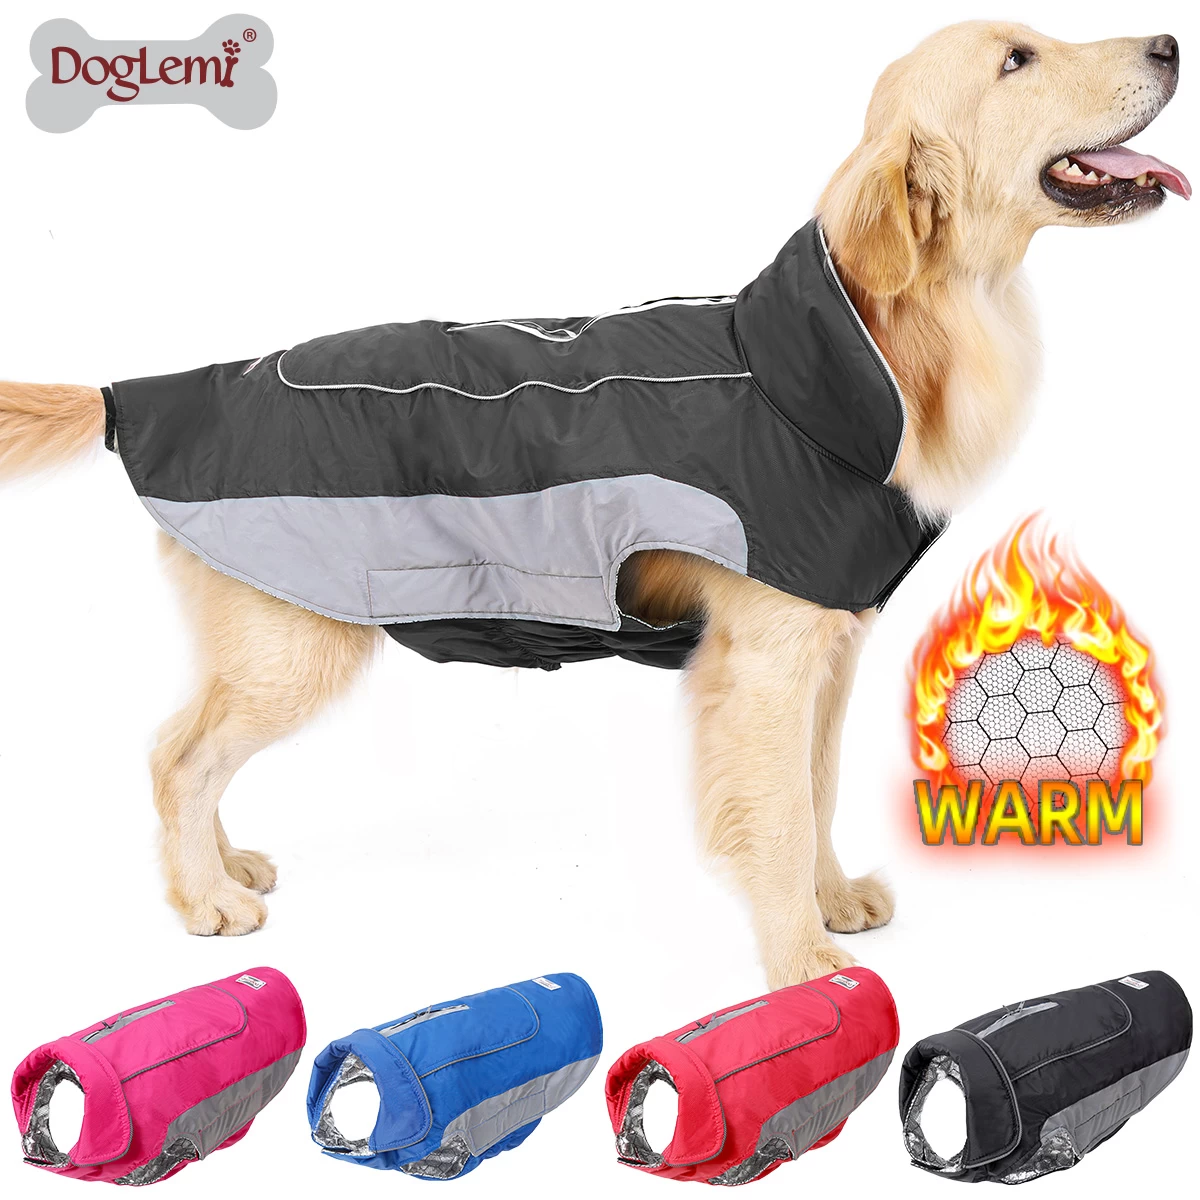 The second generation dog sports clothes